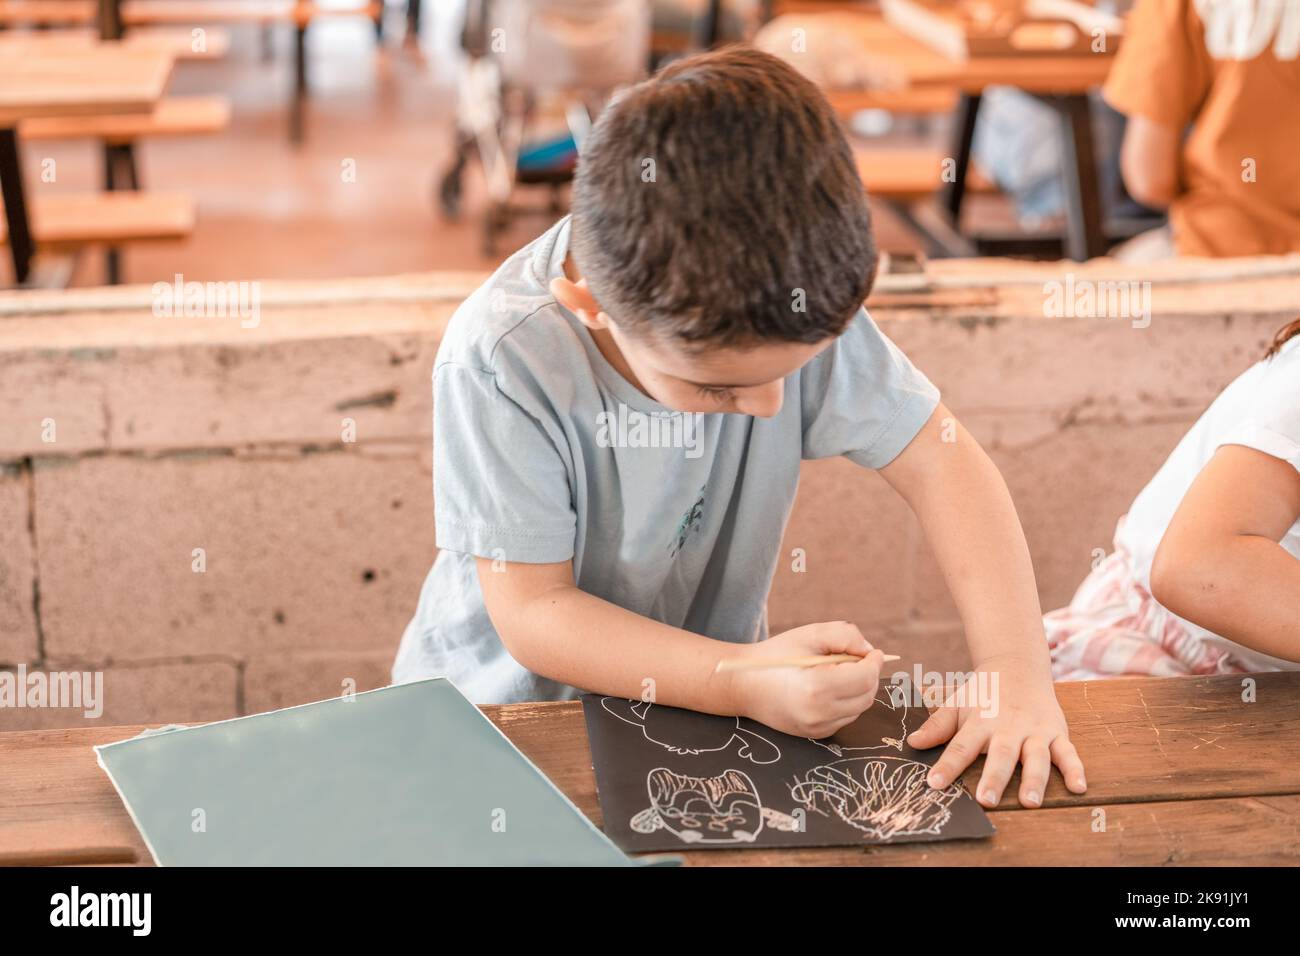 Boy Draws Colored Scratches. Girl Using A Stick To Scratch In The Black Paper. Stock Photo